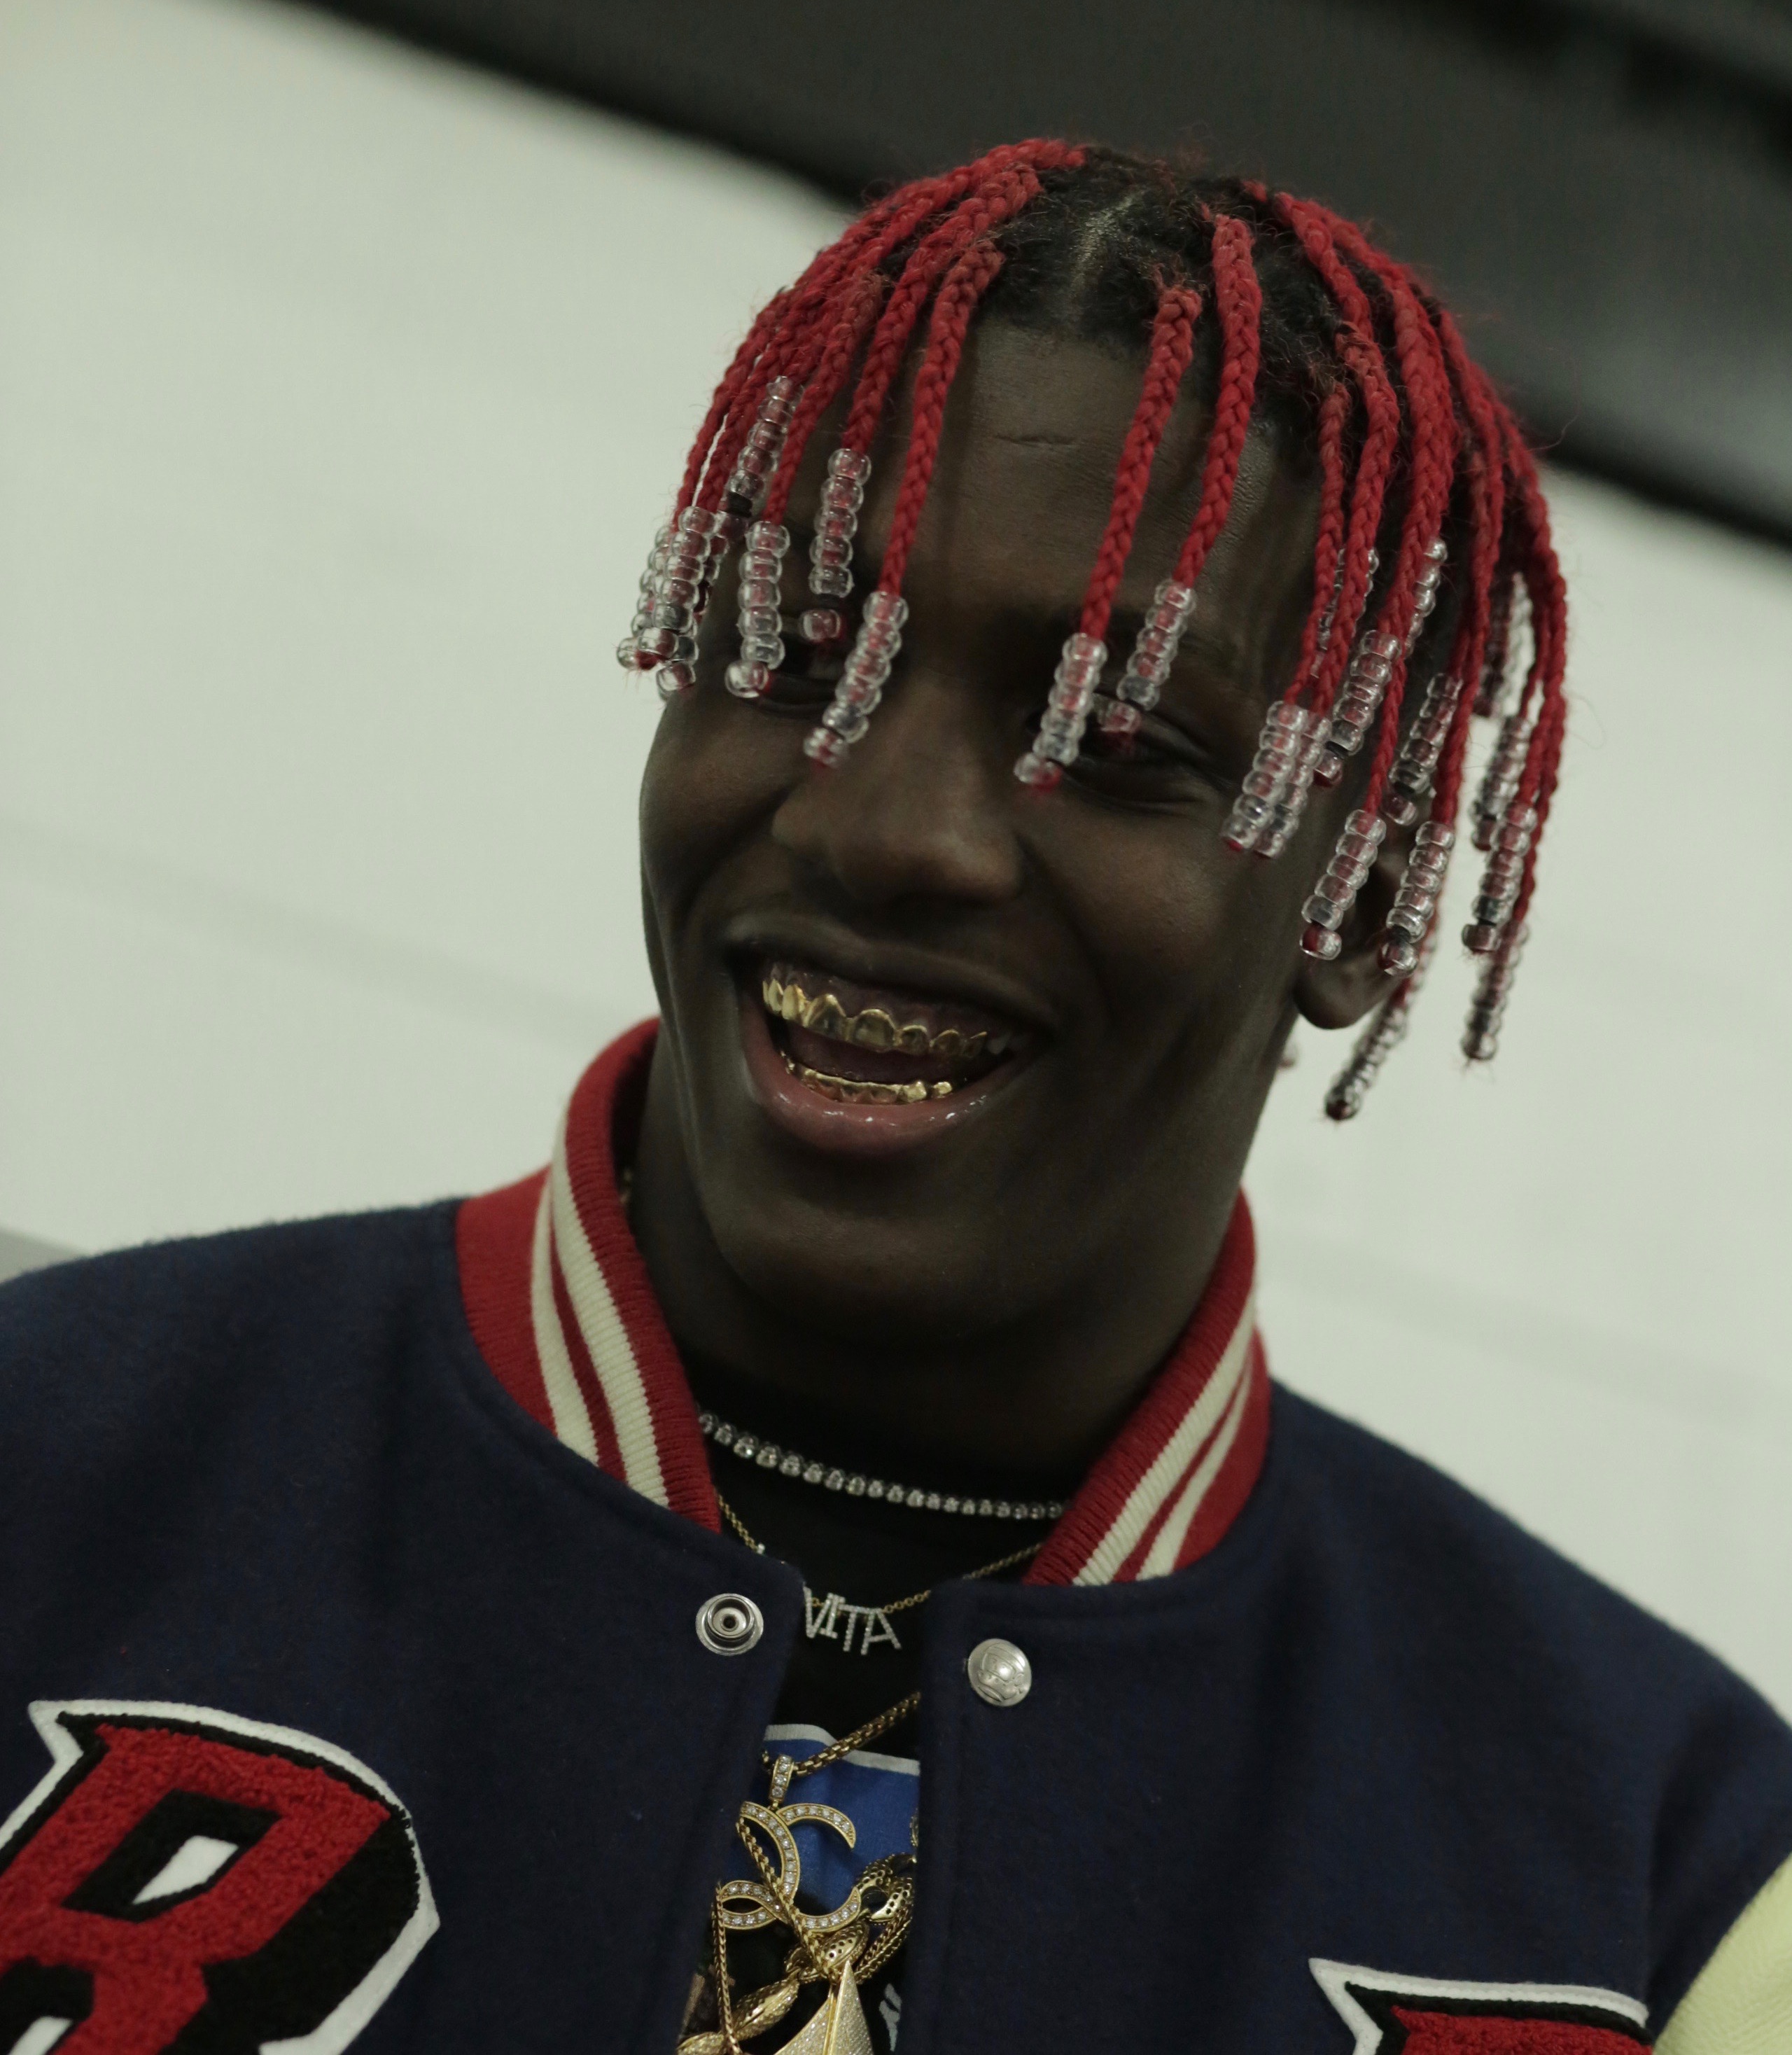 Lil Yachty GIFs | GIPHY2560 x 2935